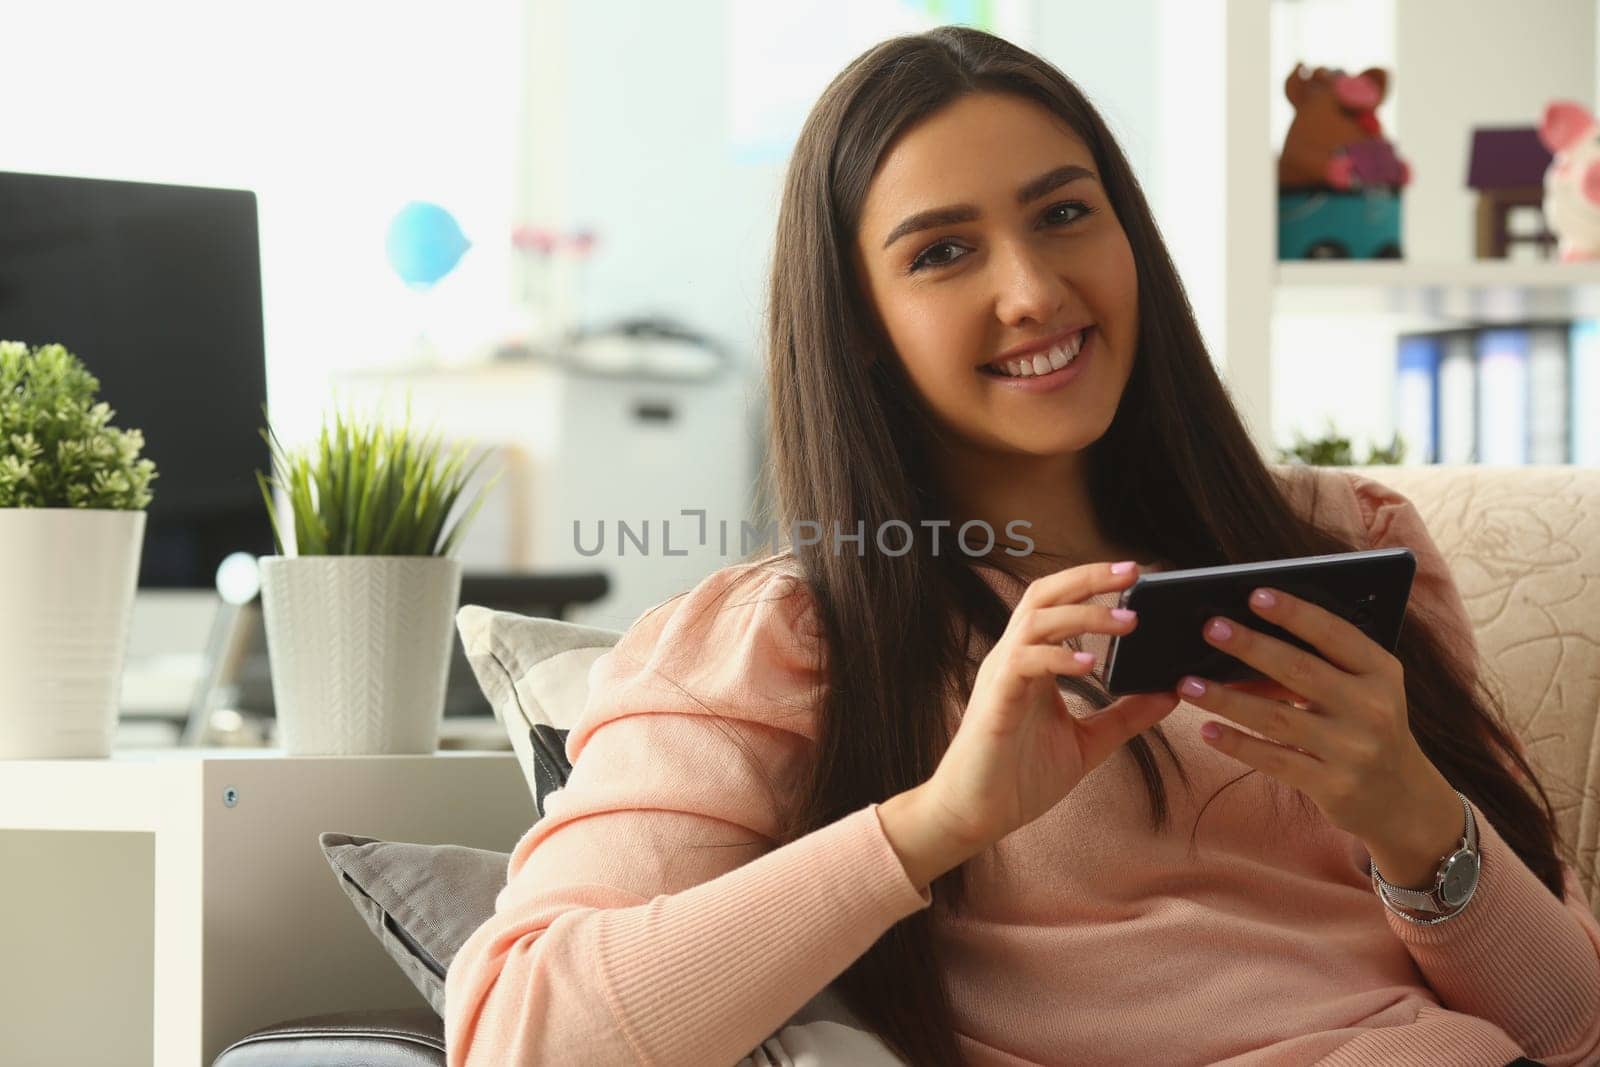 Relaxed smiling woman on sofa at home using smartphone and texting. Chat communication and mobile apps concept